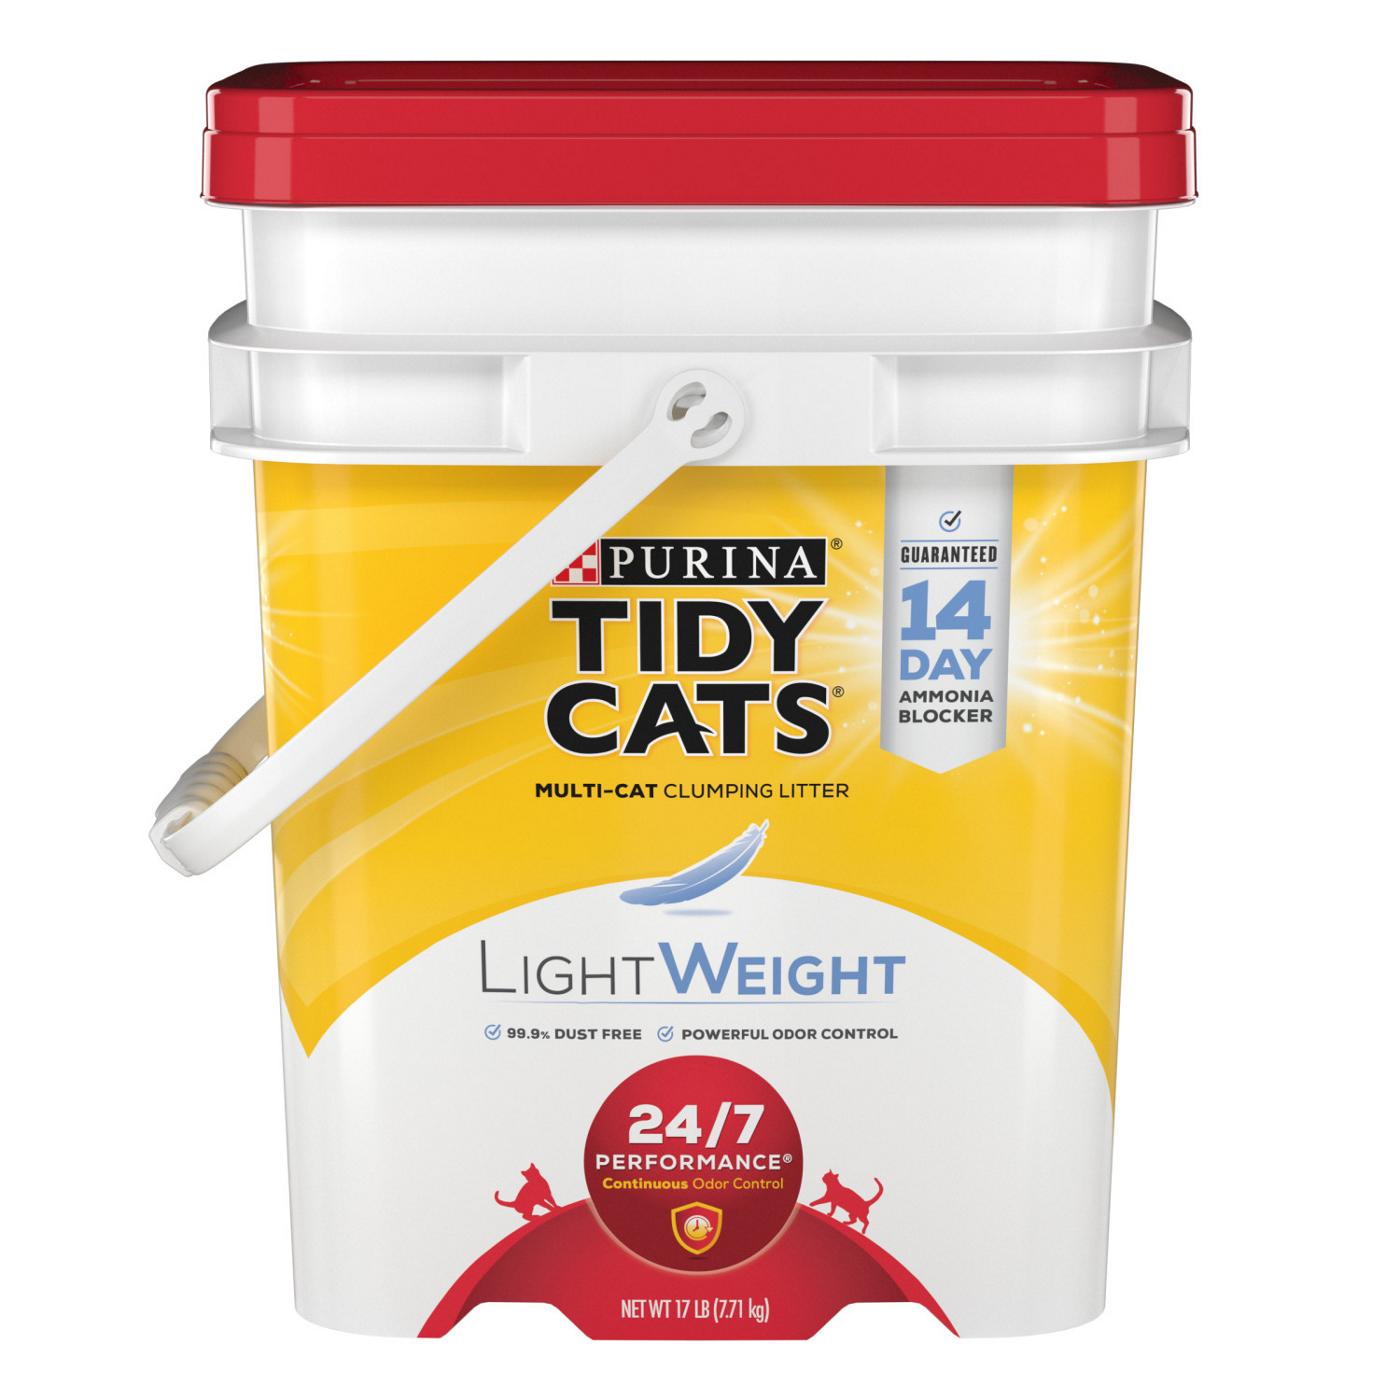 Tidy Cats Purina Tidy Cats Light Weight, Low Dust, Clumping Cat Litter 24/7 Performance Multi Cat Litter; image 1 of 7